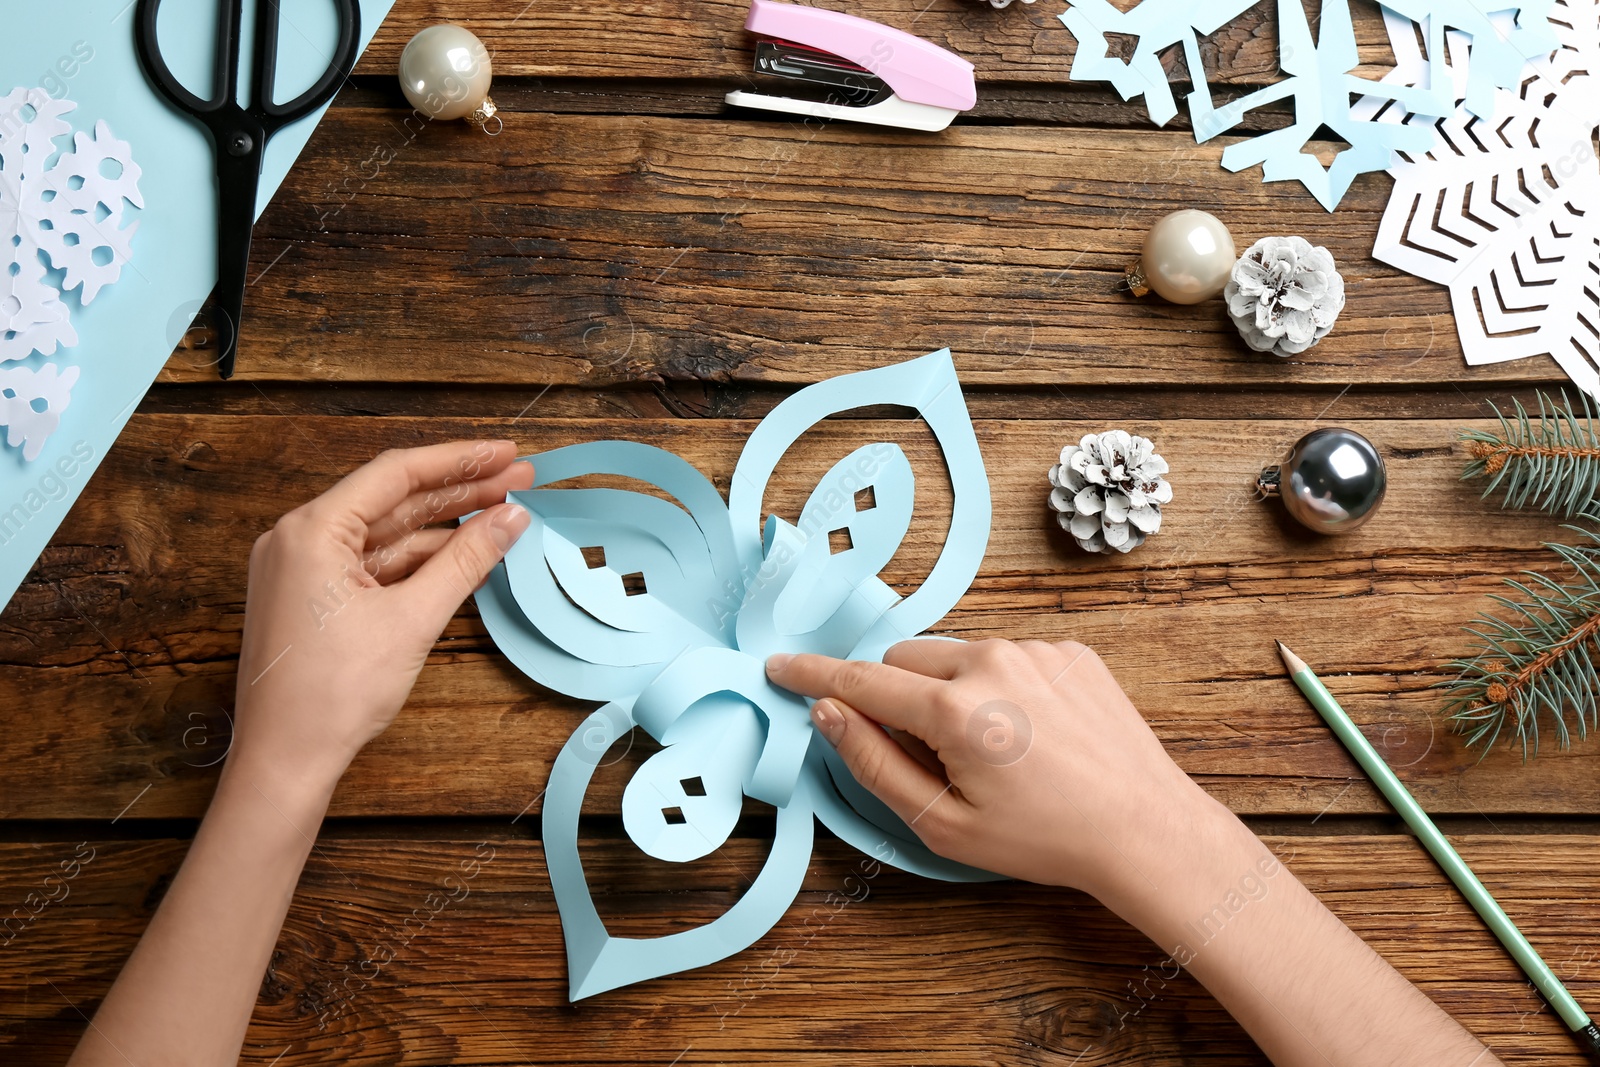 Photo of Woman making paper snowflake at wooden table, top view